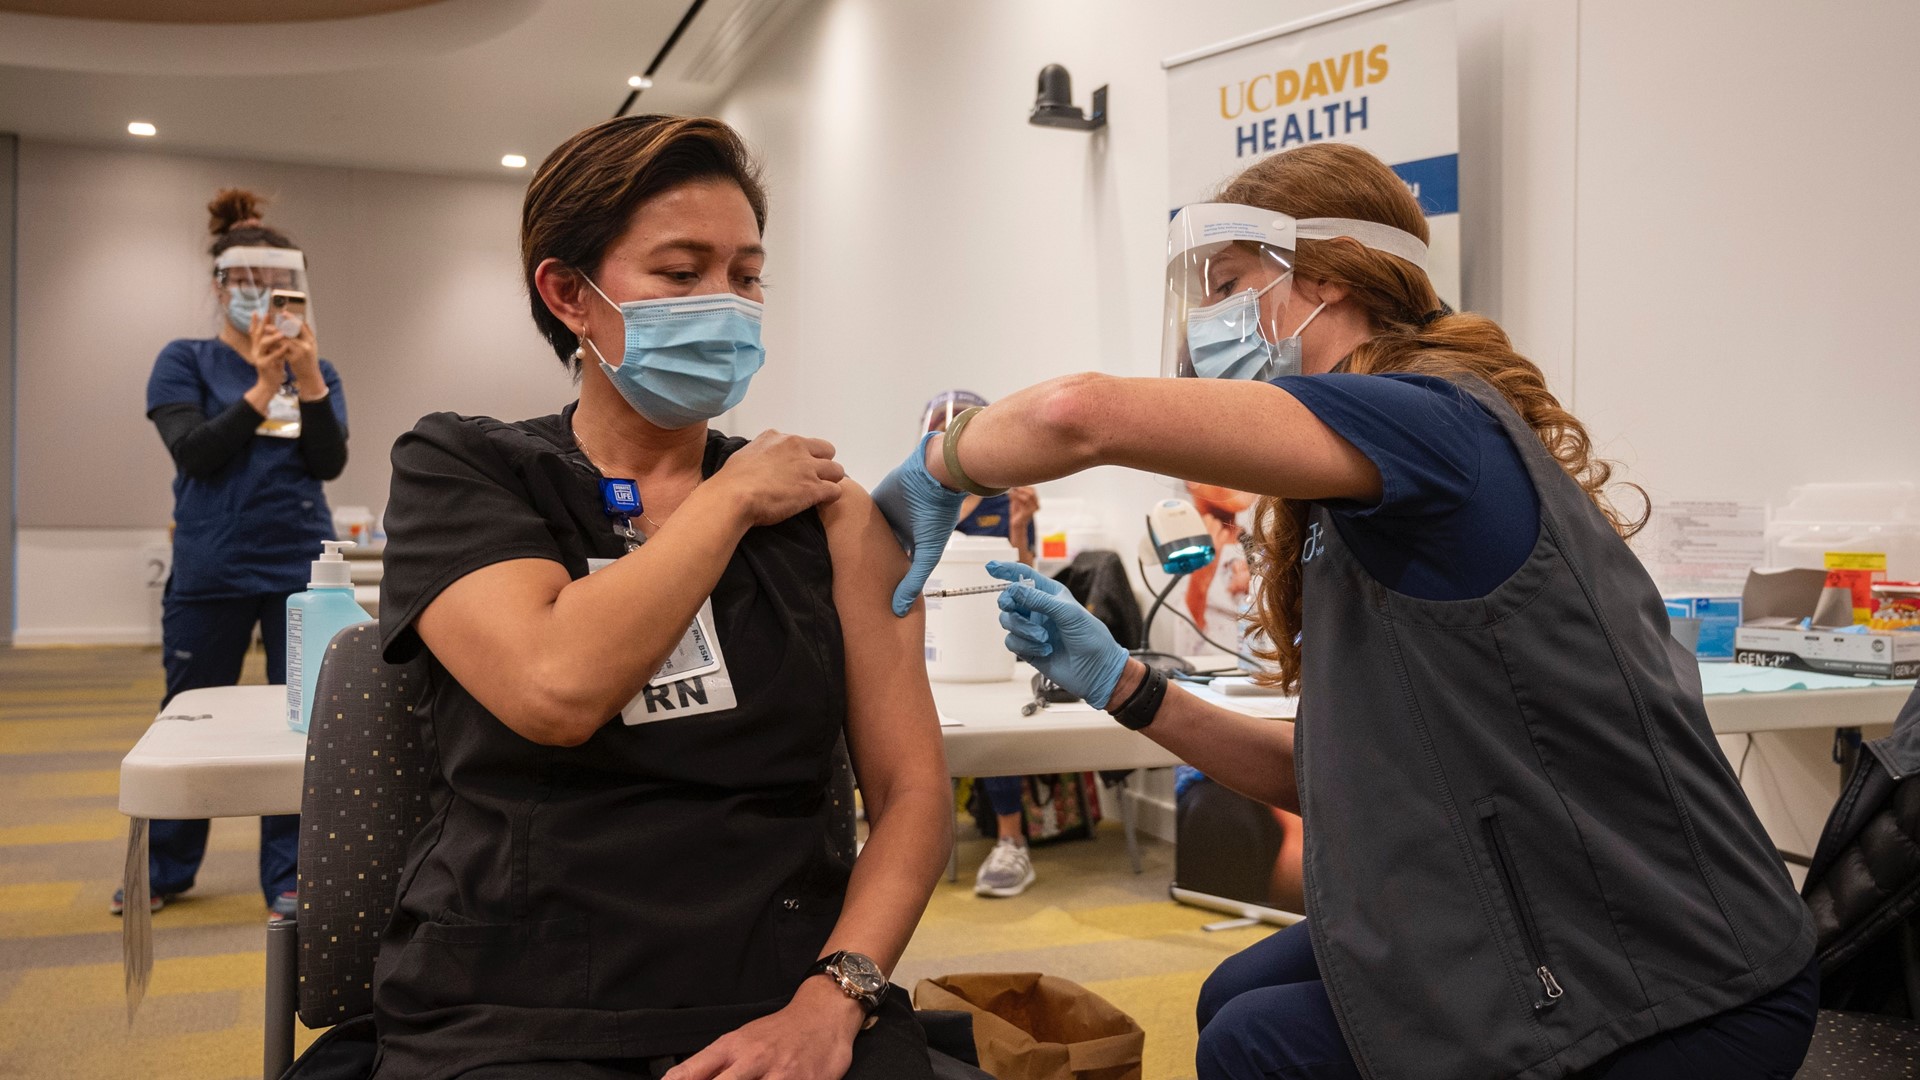 UC Davis Health received nearly 5,000 vaccines. Gov. Gavin Newsom announced that California should get another 393,000 doses of the Pfizer vaccine by Friday.